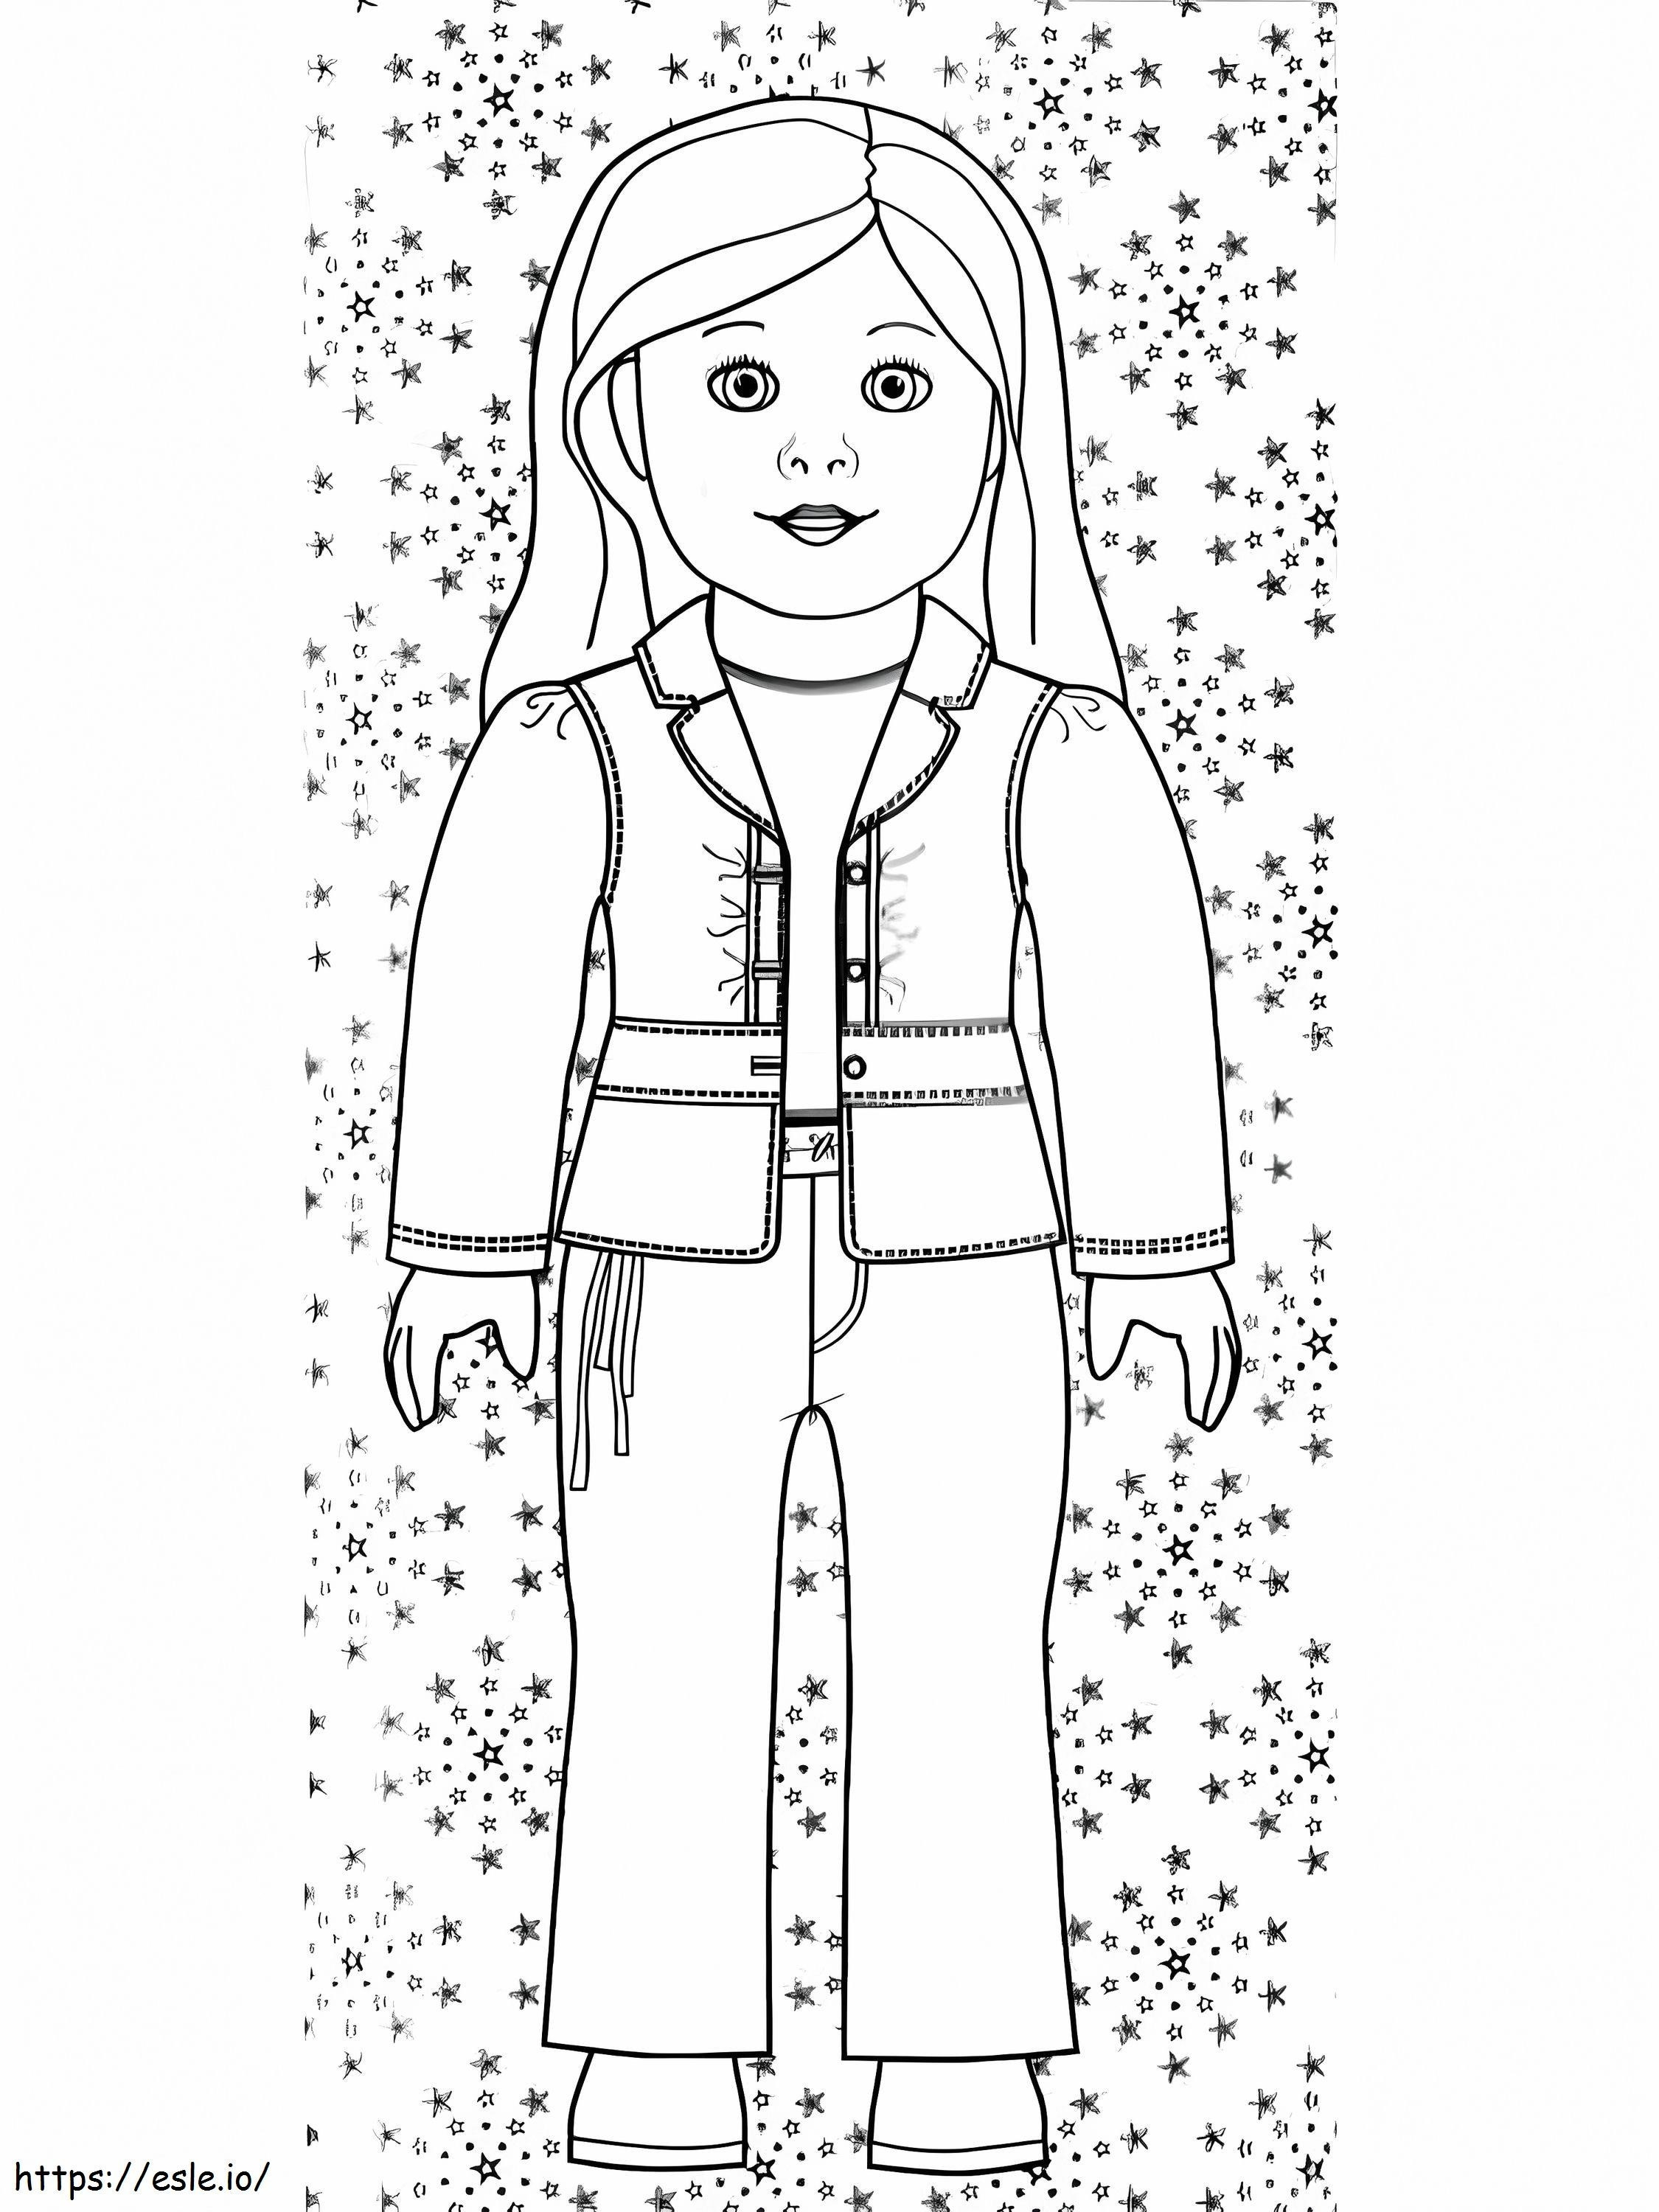 American Girl 13 coloring page